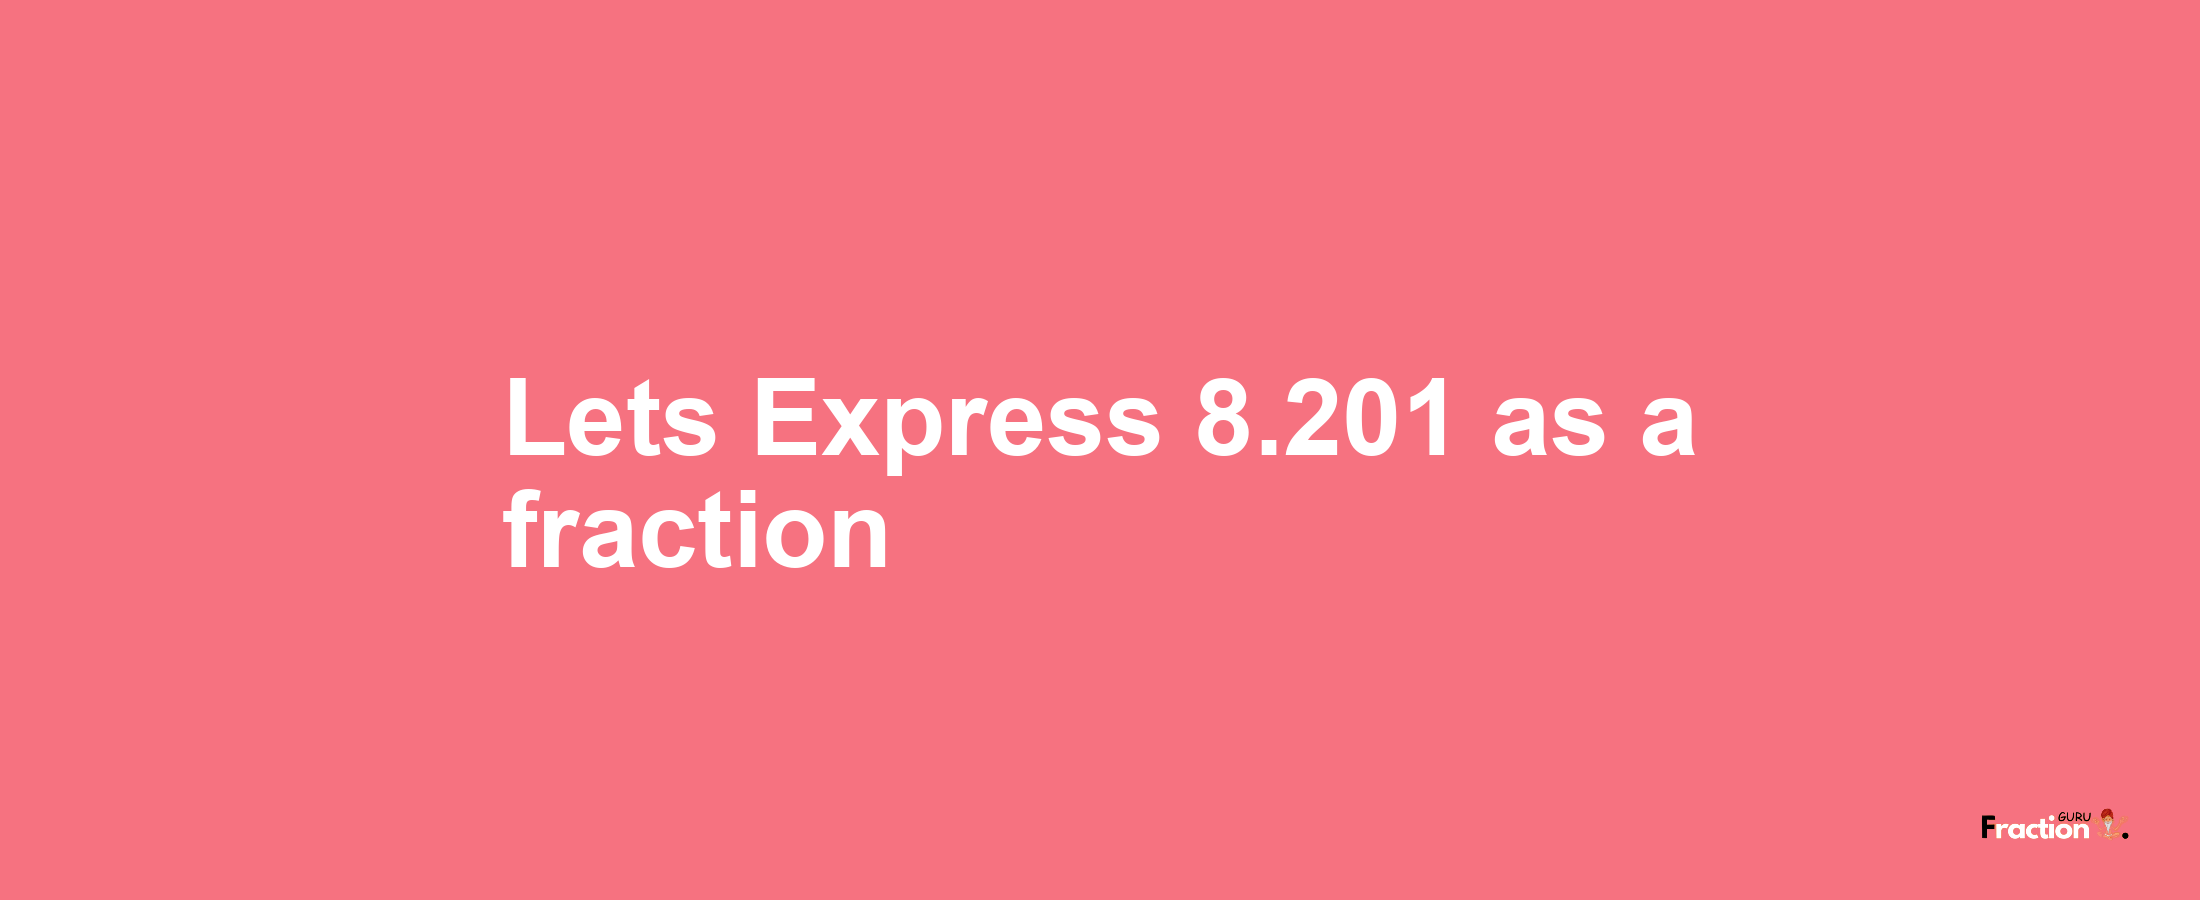 Lets Express 8.201 as afraction